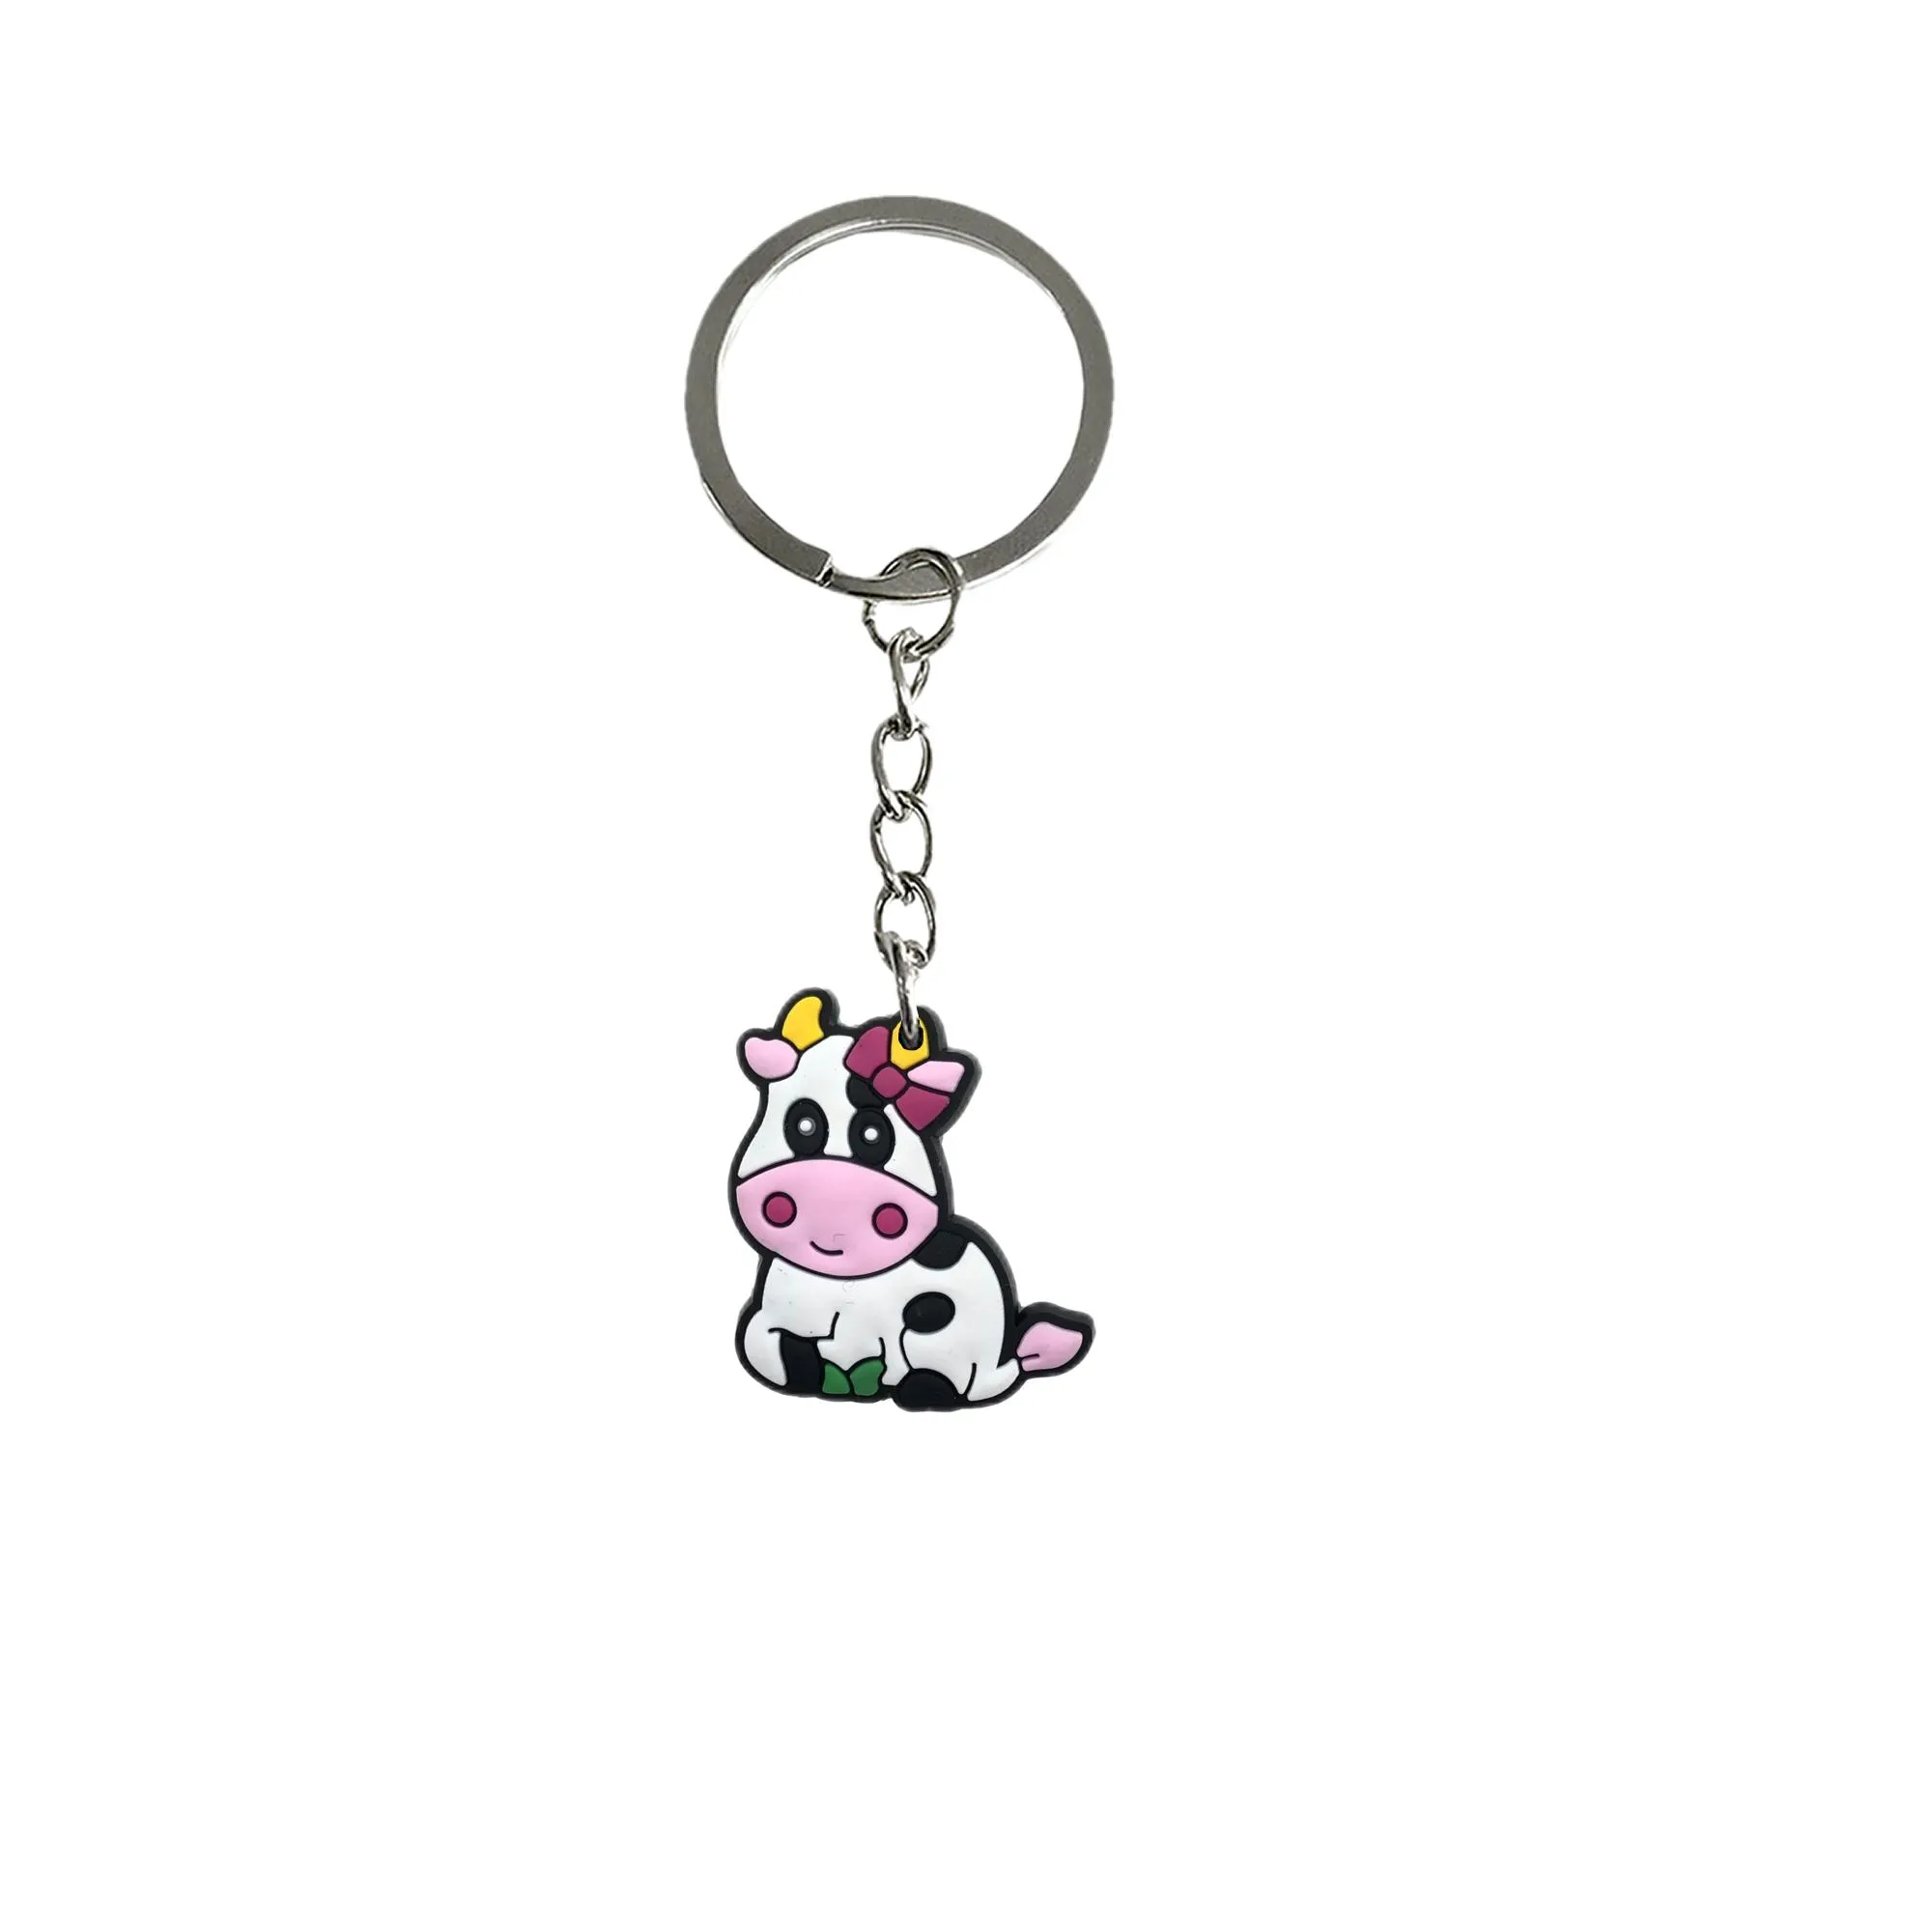 cow 32 keychain keychains for women key chain kid boy girl party favors gift pendants accessories kids birthday keyring suitable schoolbag backpack car charms anime cool backpacks ring girls